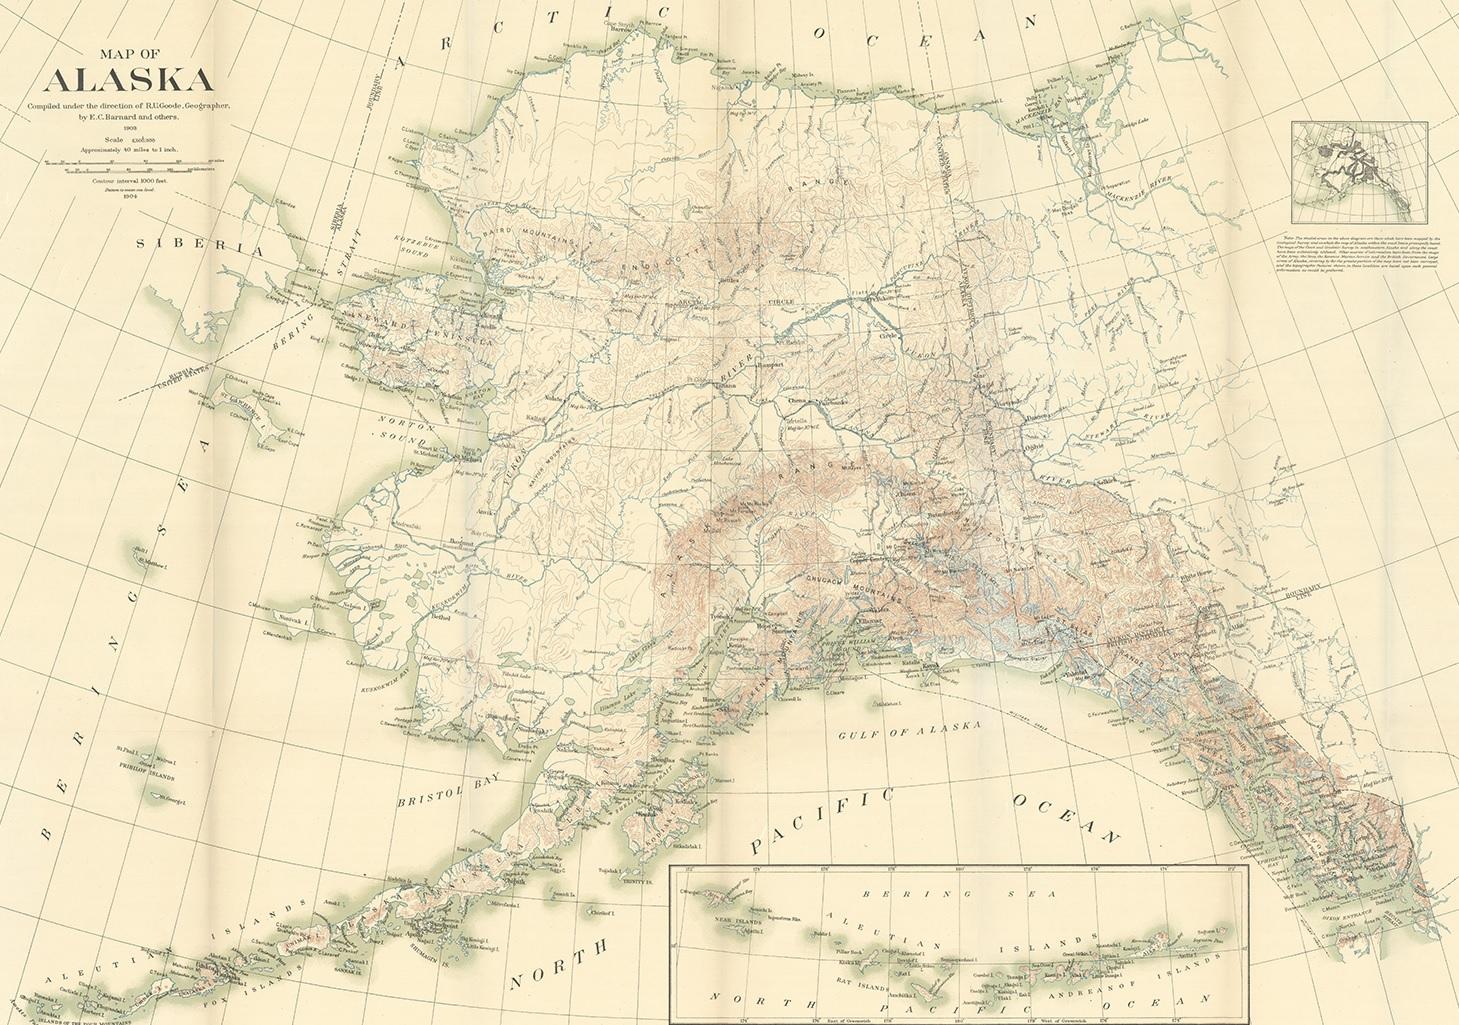 An antique map titled 'Map of Alaska Compiled Under the Direction of R.U. Goode, Geographer,' which relies on data from both the U.S. Geological Survey and the U.S. Coast and Geodetic Survey; a significant historical document. Here are some aspects